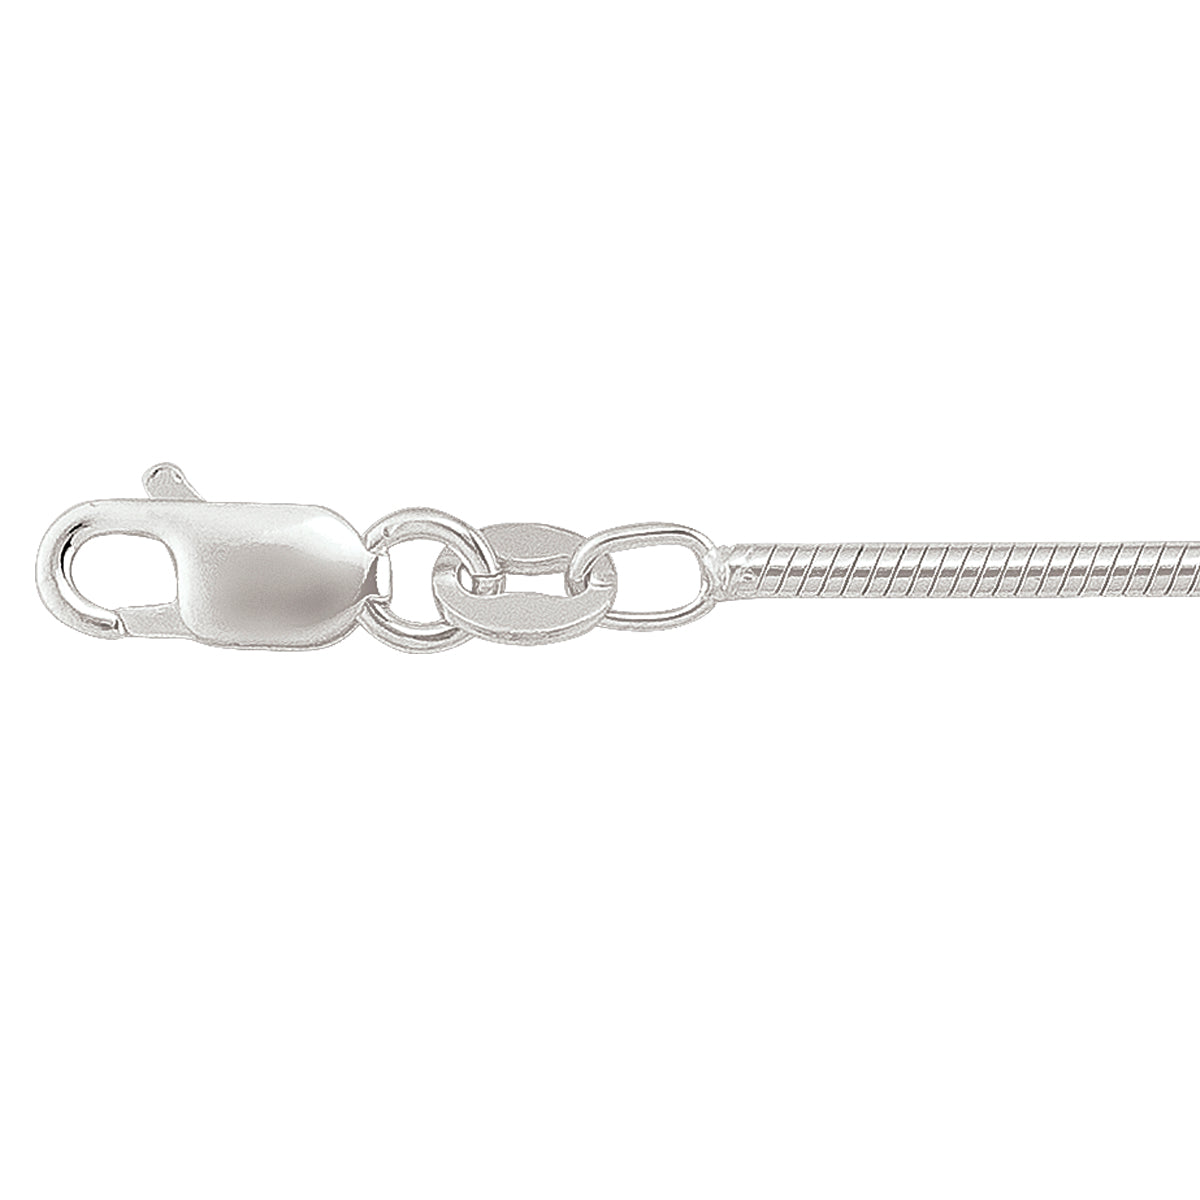 CHAINS SILVER ROUND SNAKE LINK 